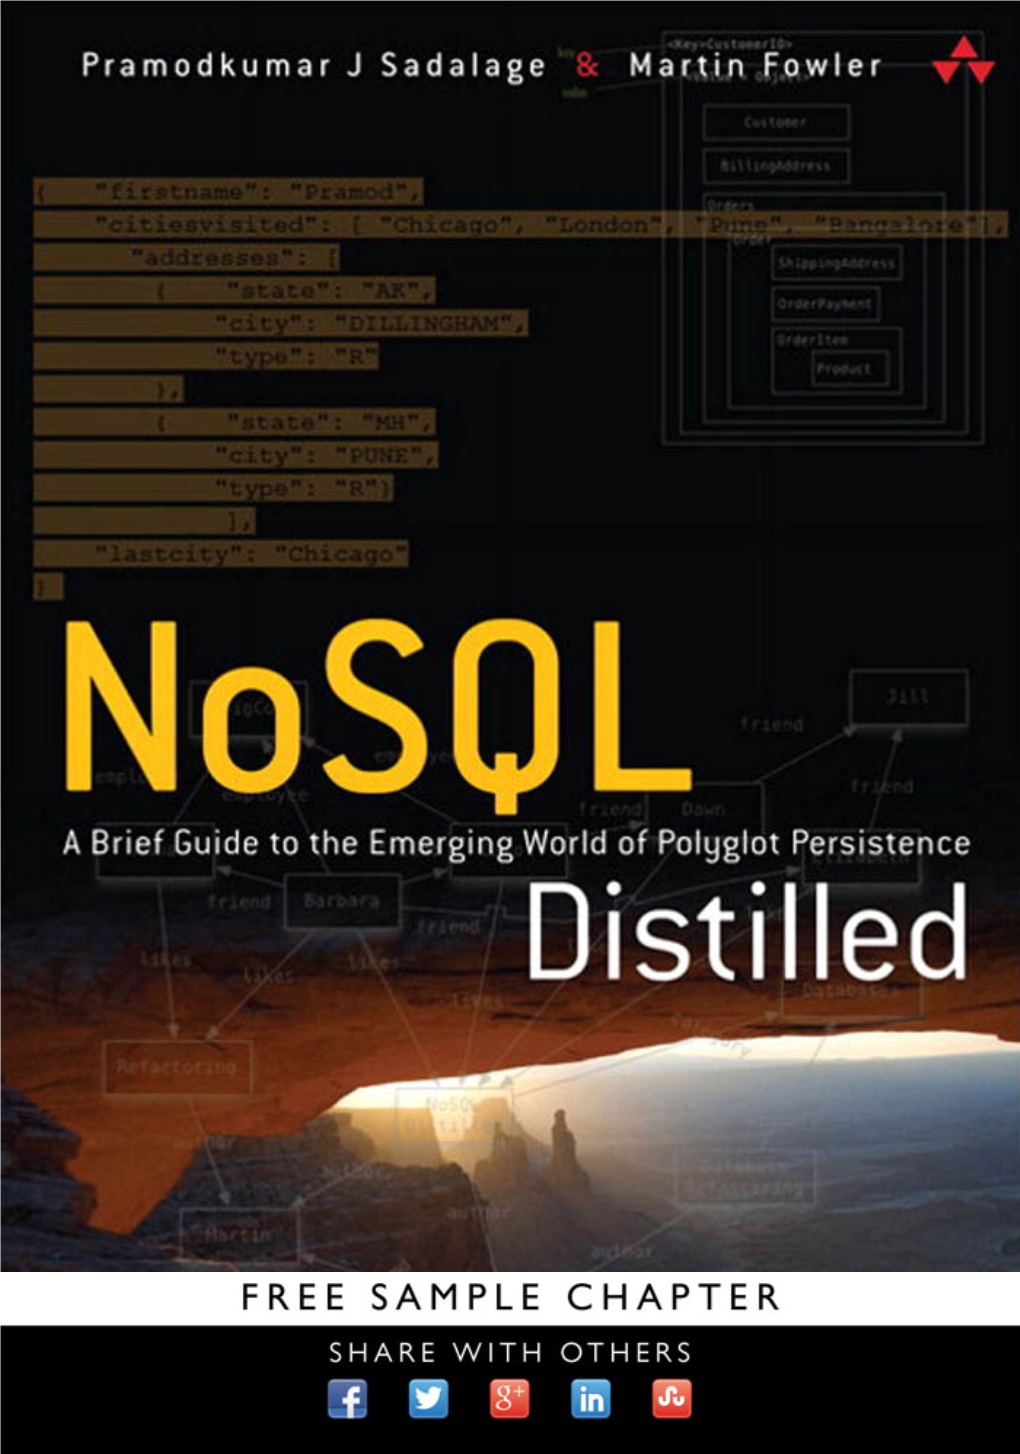 Nosql Distilled: a Brief Guide to the Emerging World of Polyglot Persistence